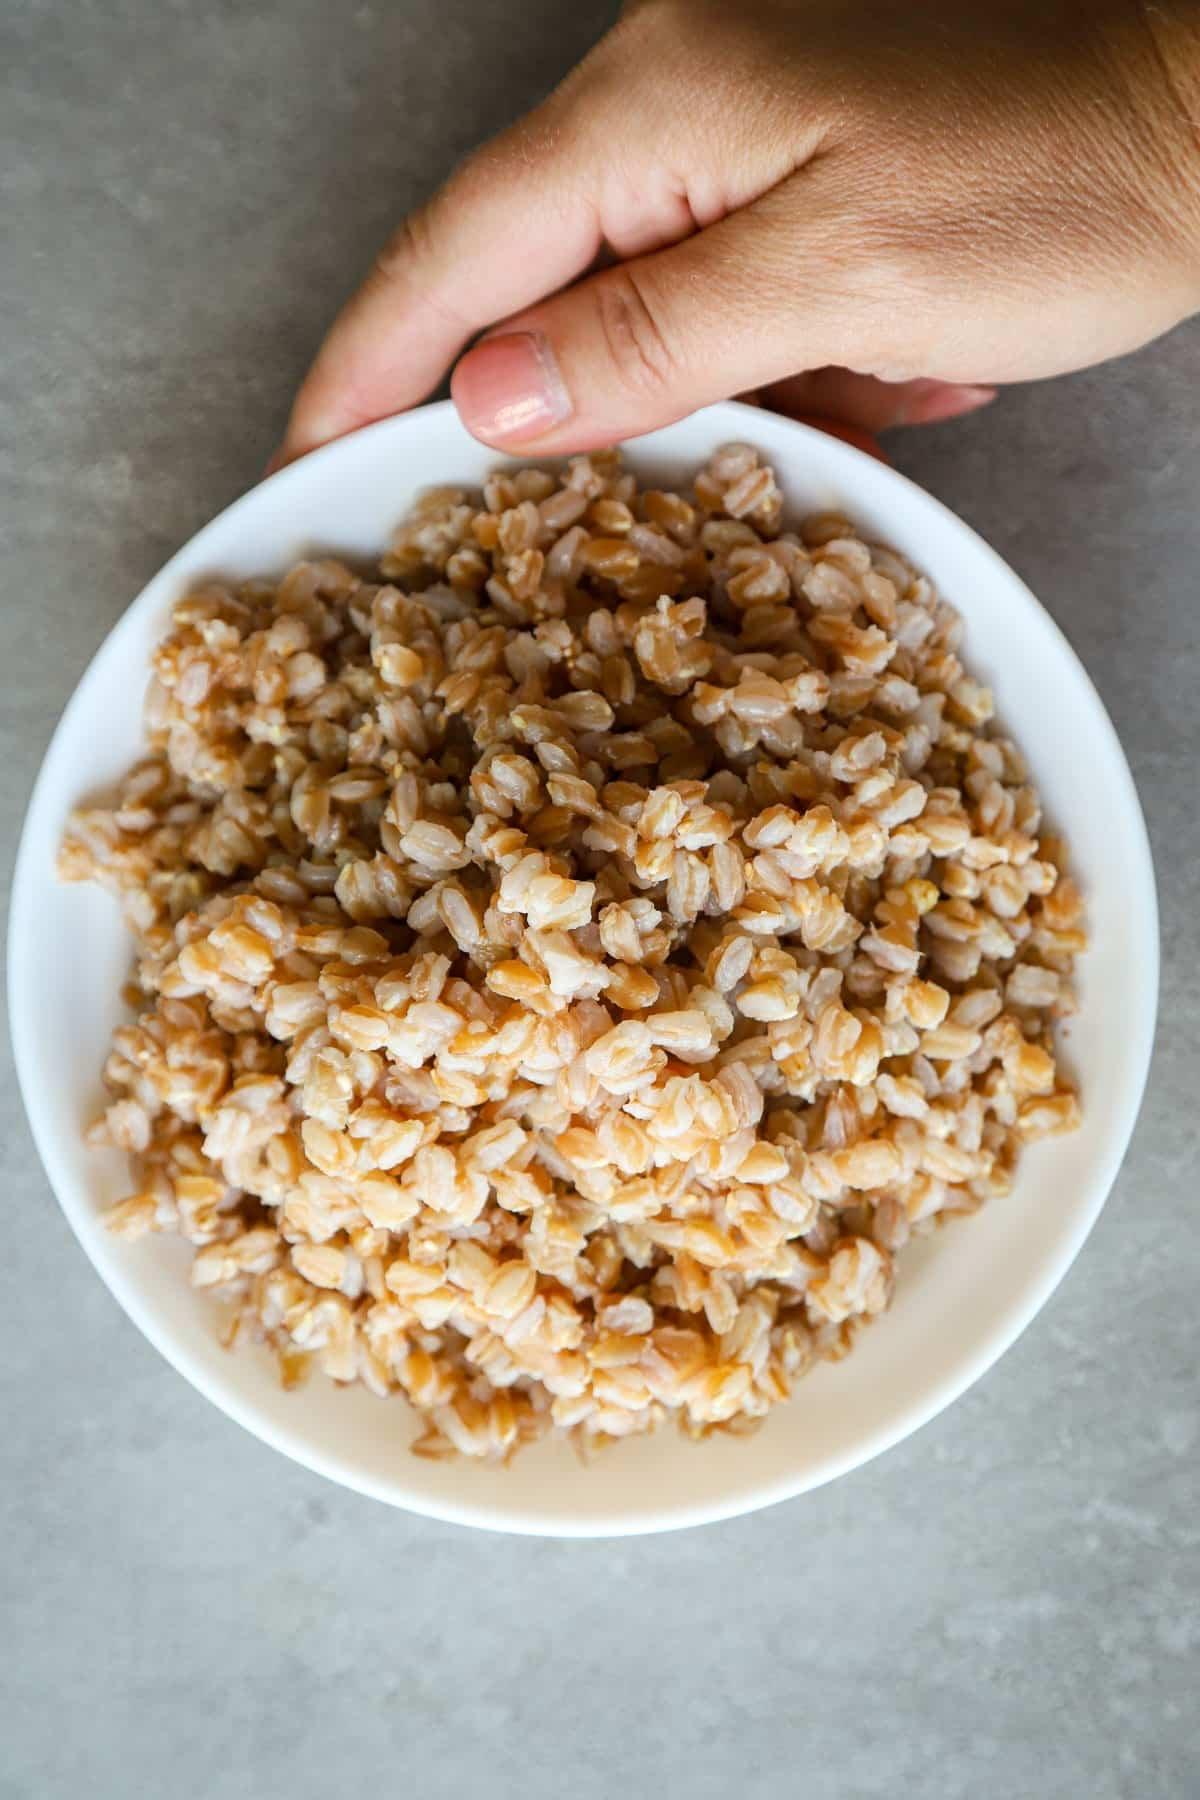 Cooked farro in a white bowl a woman is holding.